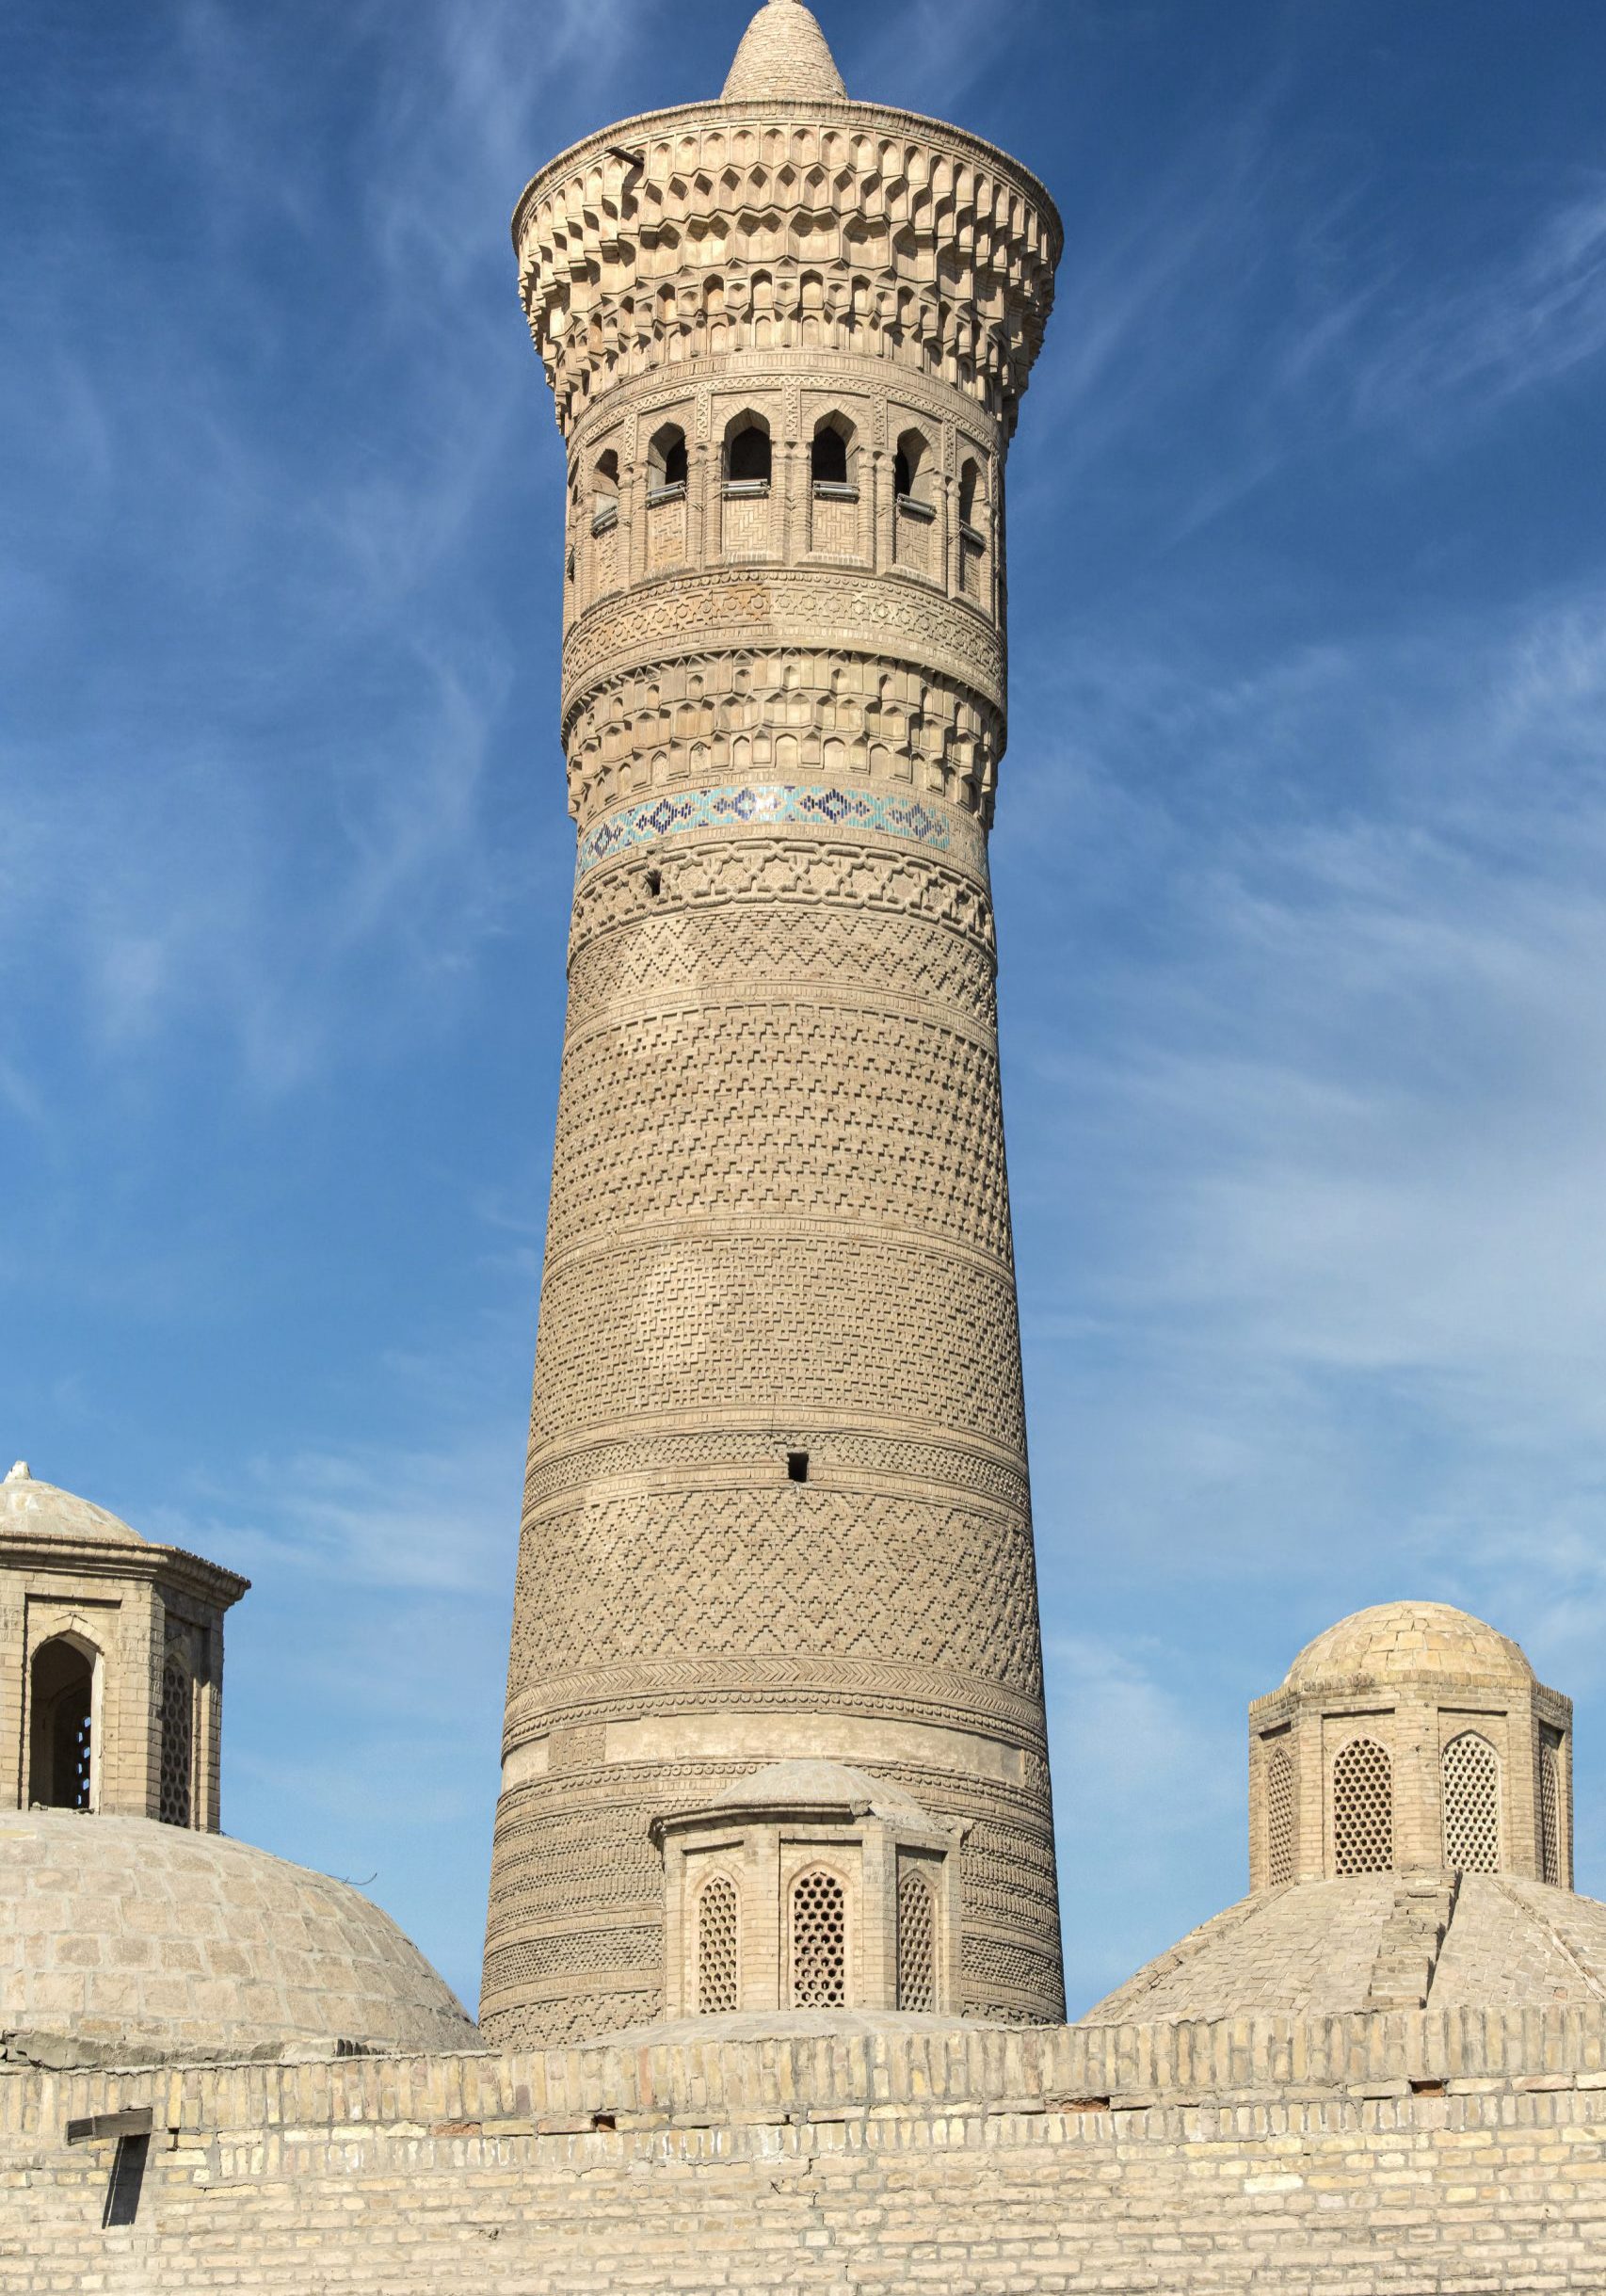 Minaret in the historic old town of Bukhara (also called Buchara or Buxoro) is listed as UNESCO World Heritage Site. Bukhara was one of the most important oasis and place of caravanserais at the Great Silk Road.